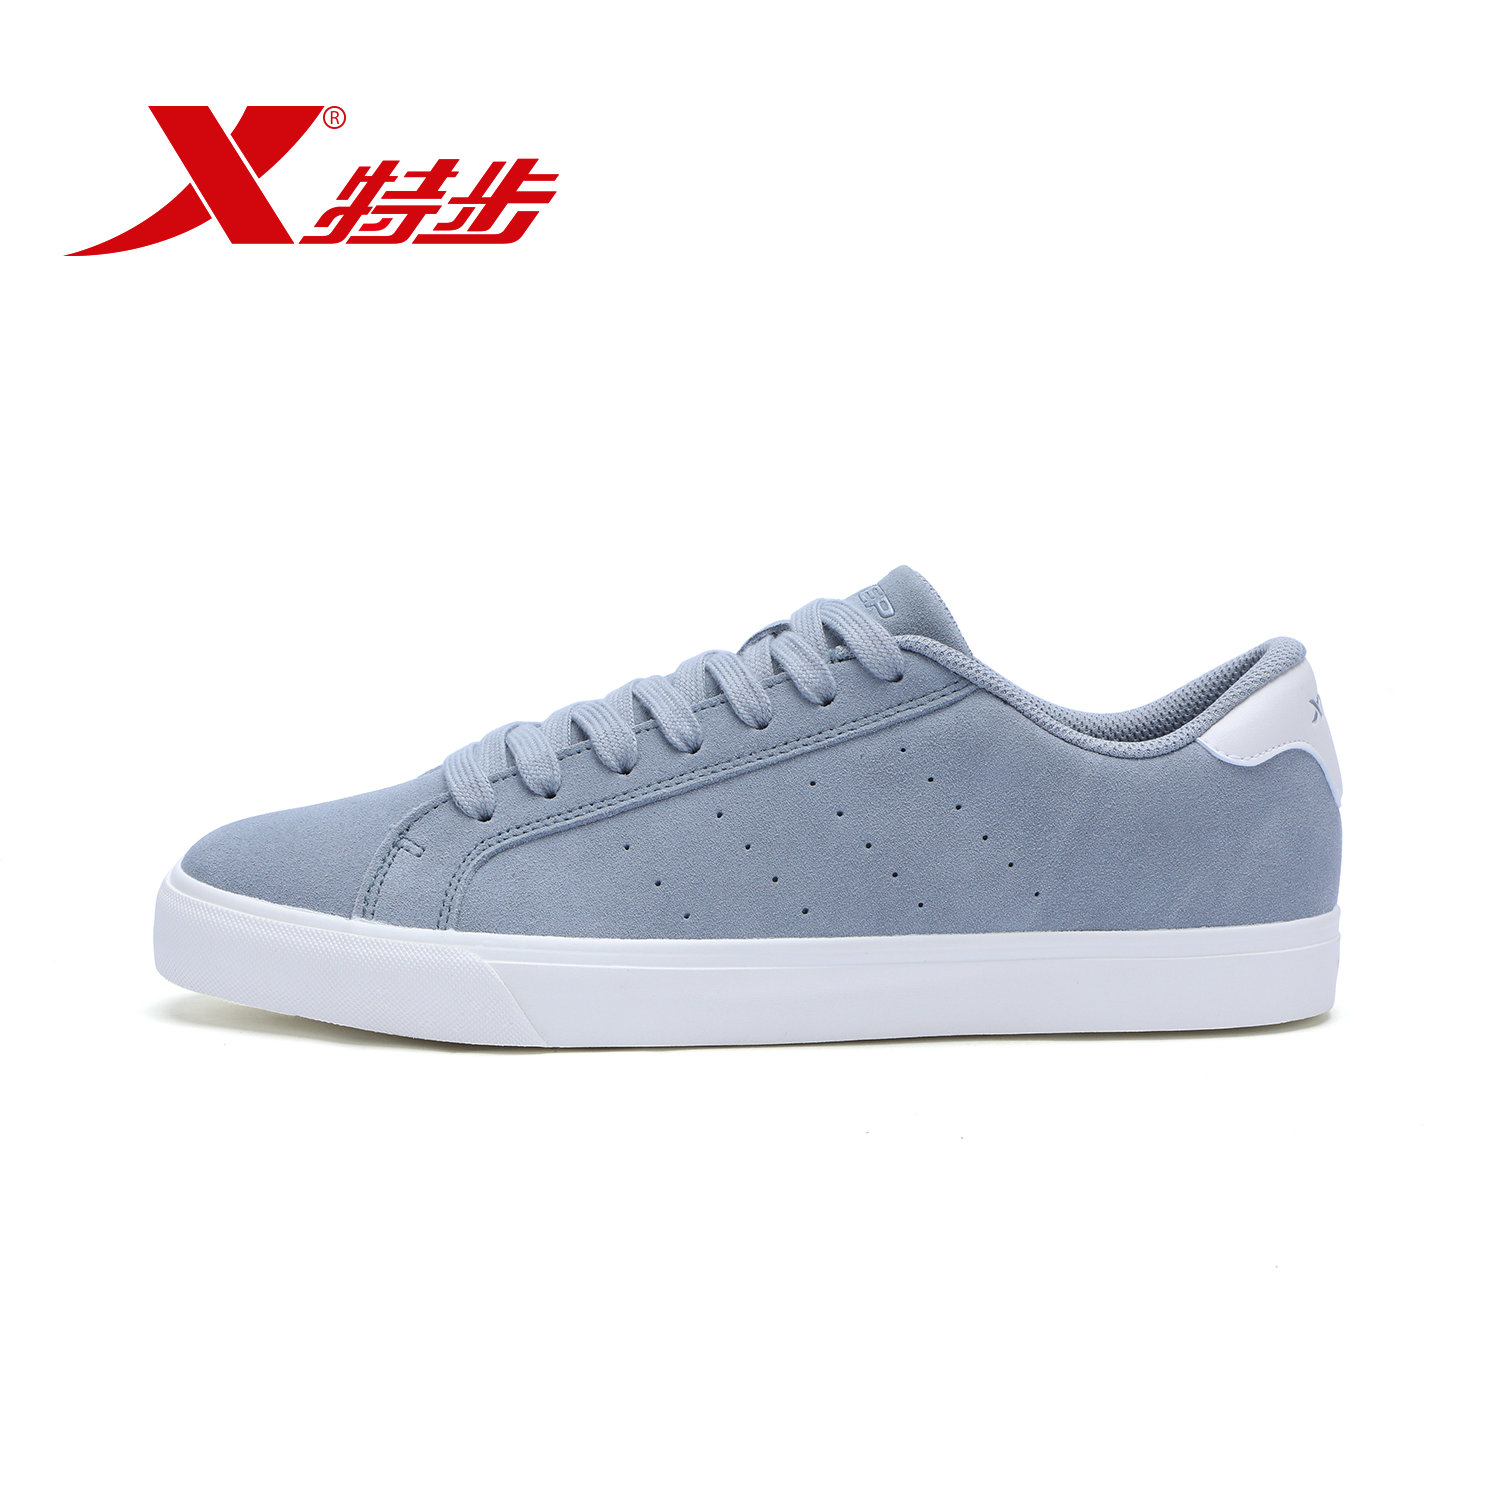 Special Step Men's Shoe Board Shoes 2019 Autumn/Winter New Reversed Suede Upper Casual Shoes Vulcanized Soles Sports Shoes